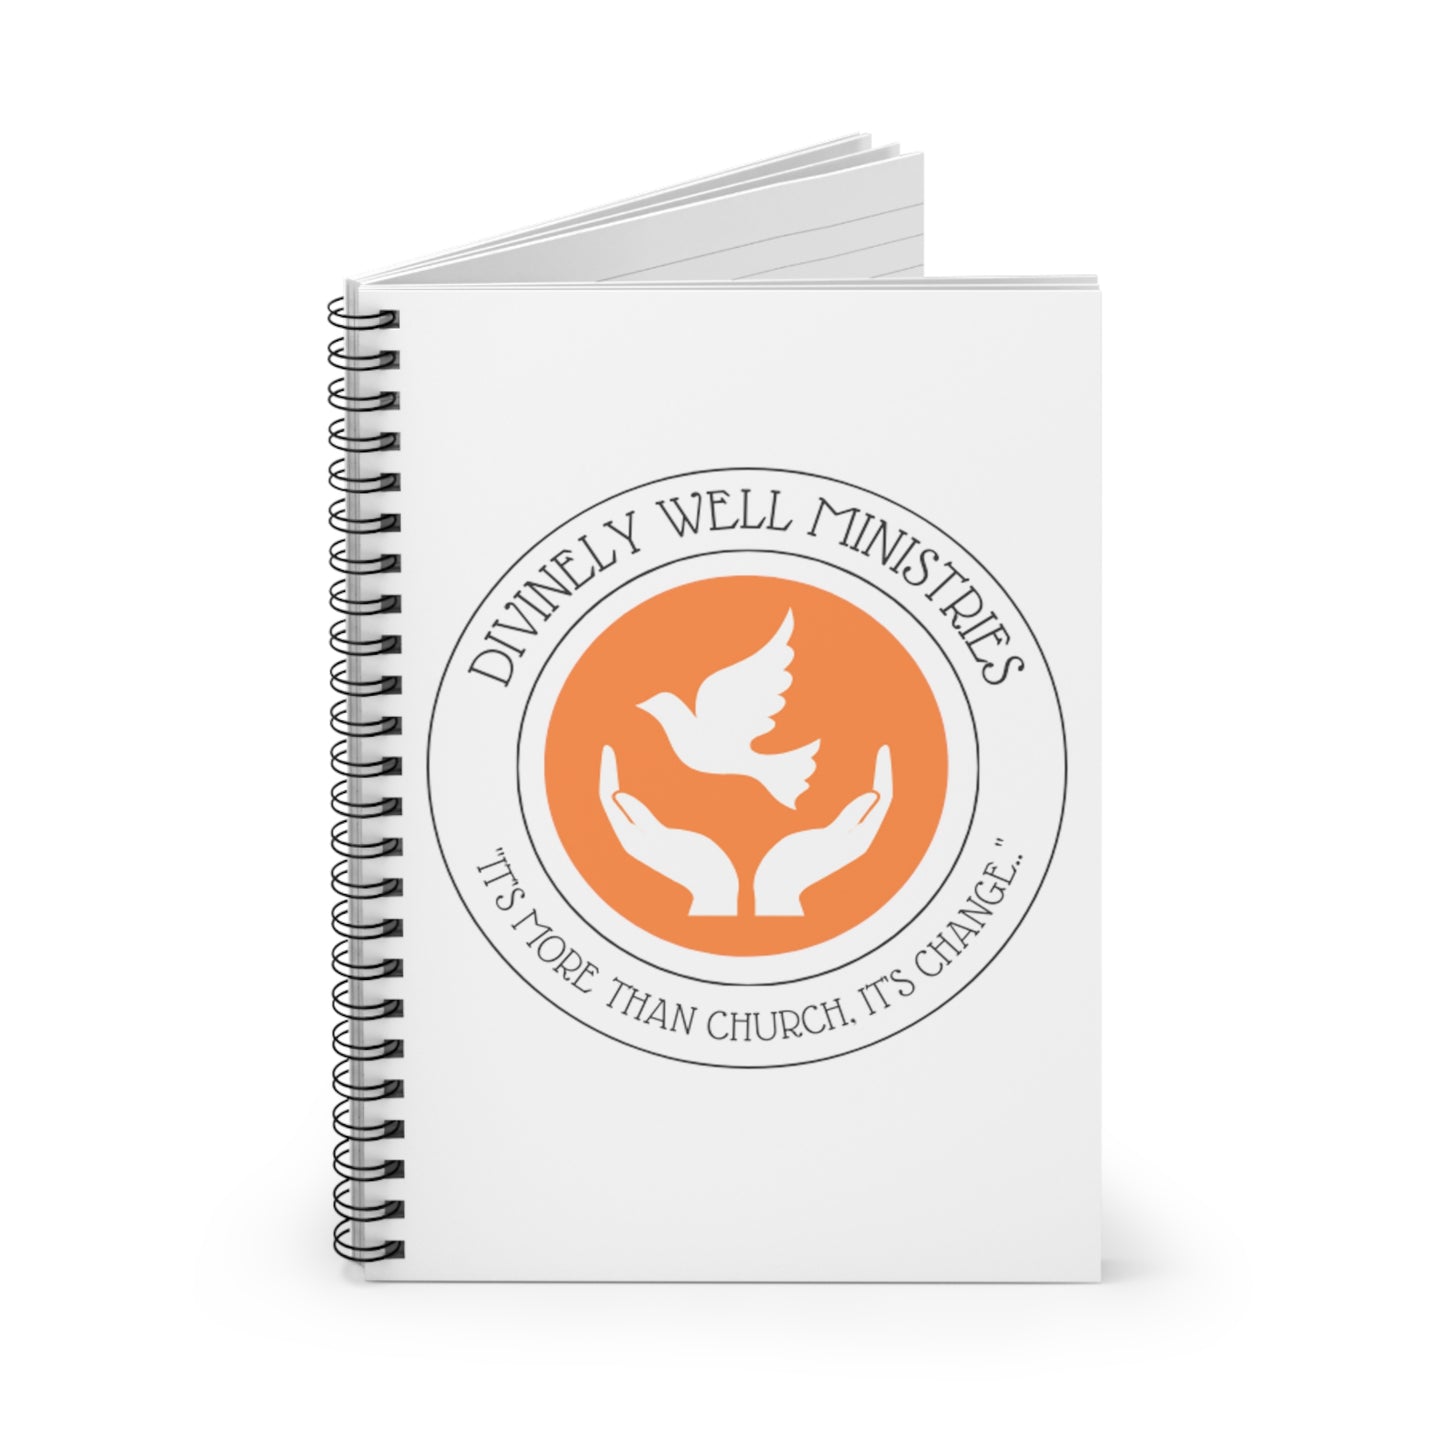 Divinely Well Ministries Spiral Notebook - Ruled Line